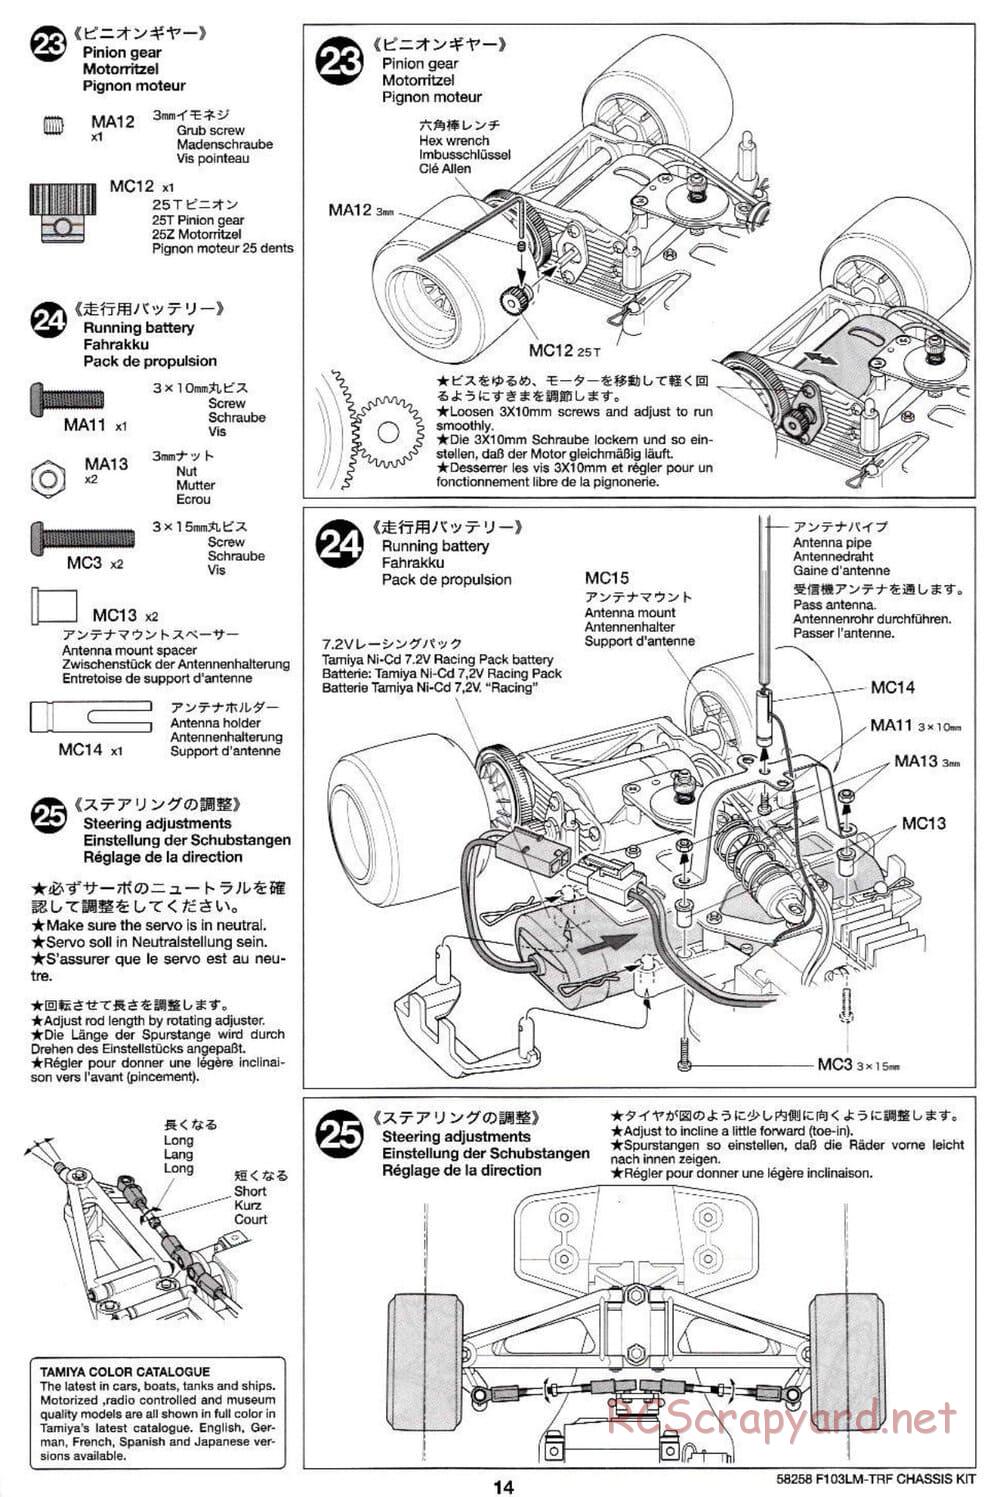 Tamiya - F103LM TRF Special Chassis - Manual - Page 14